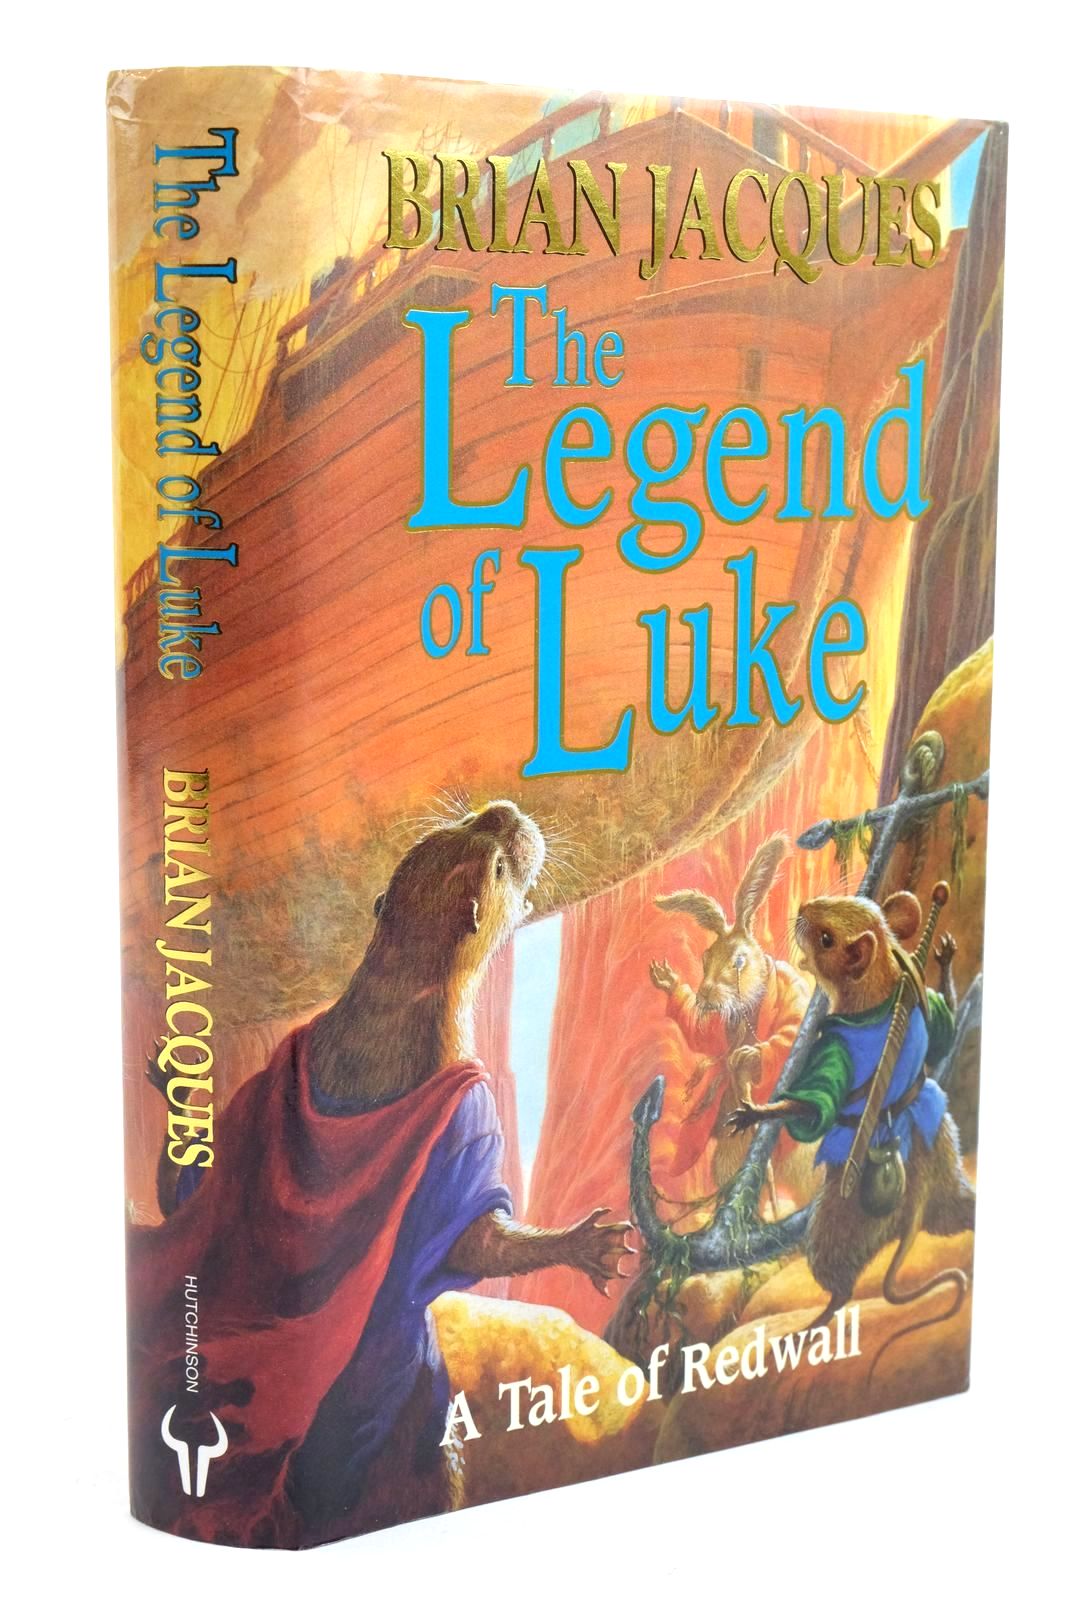 Photo of THE LEGEND OF LUKE written by Jacques, Brian illustrated by Fangorn,  published by Hutchinson (STOCK CODE: 1322145)  for sale by Stella & Rose's Books